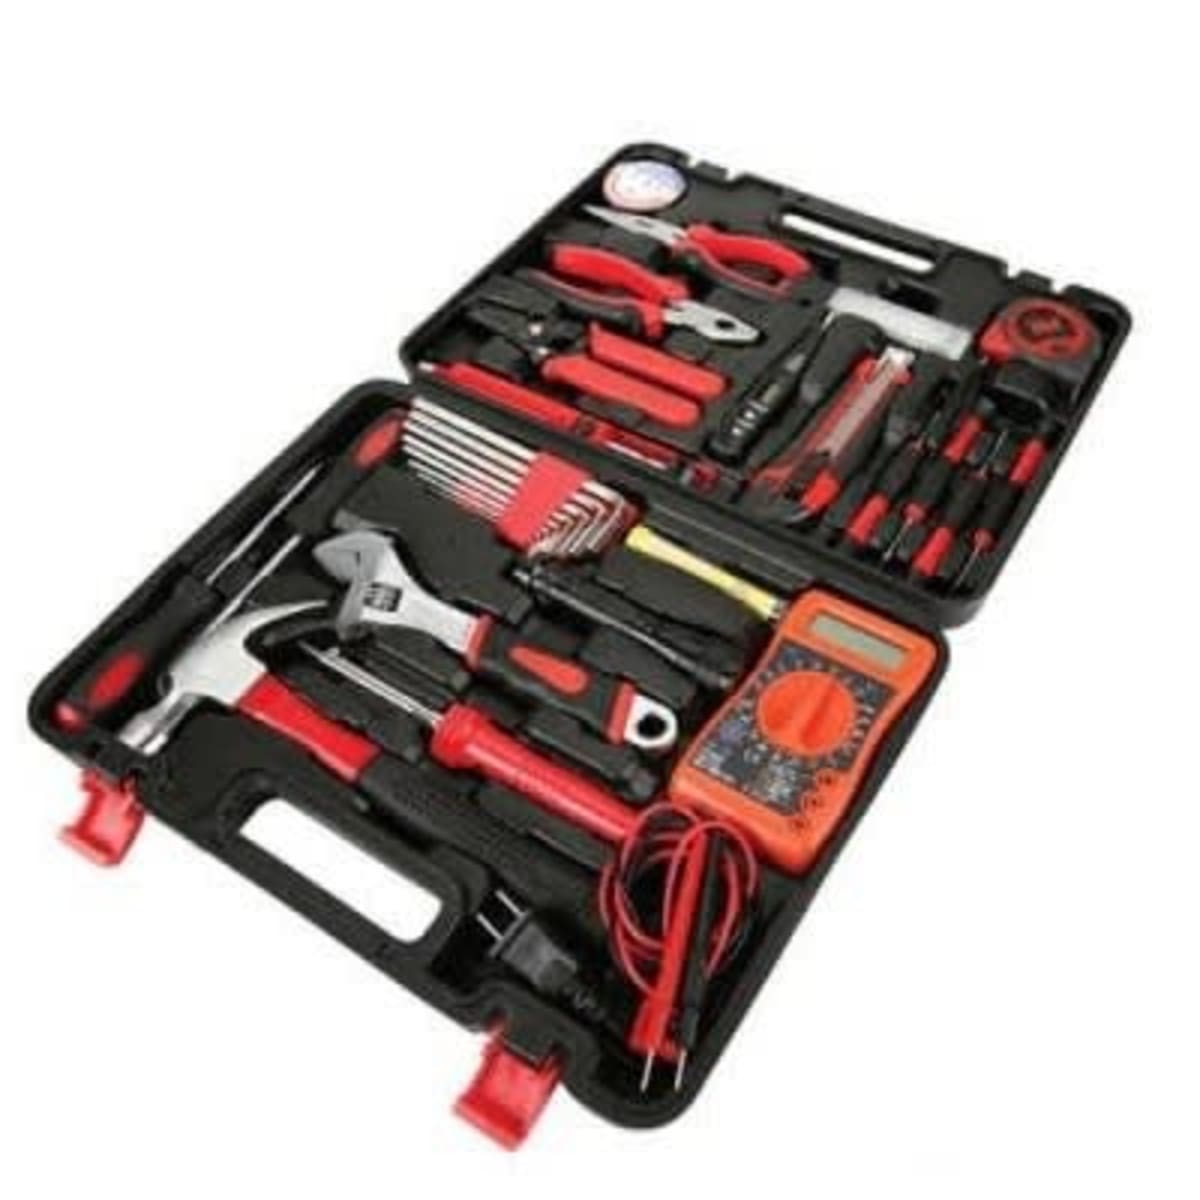 Household Electrical Tool Box - 35 Pieces